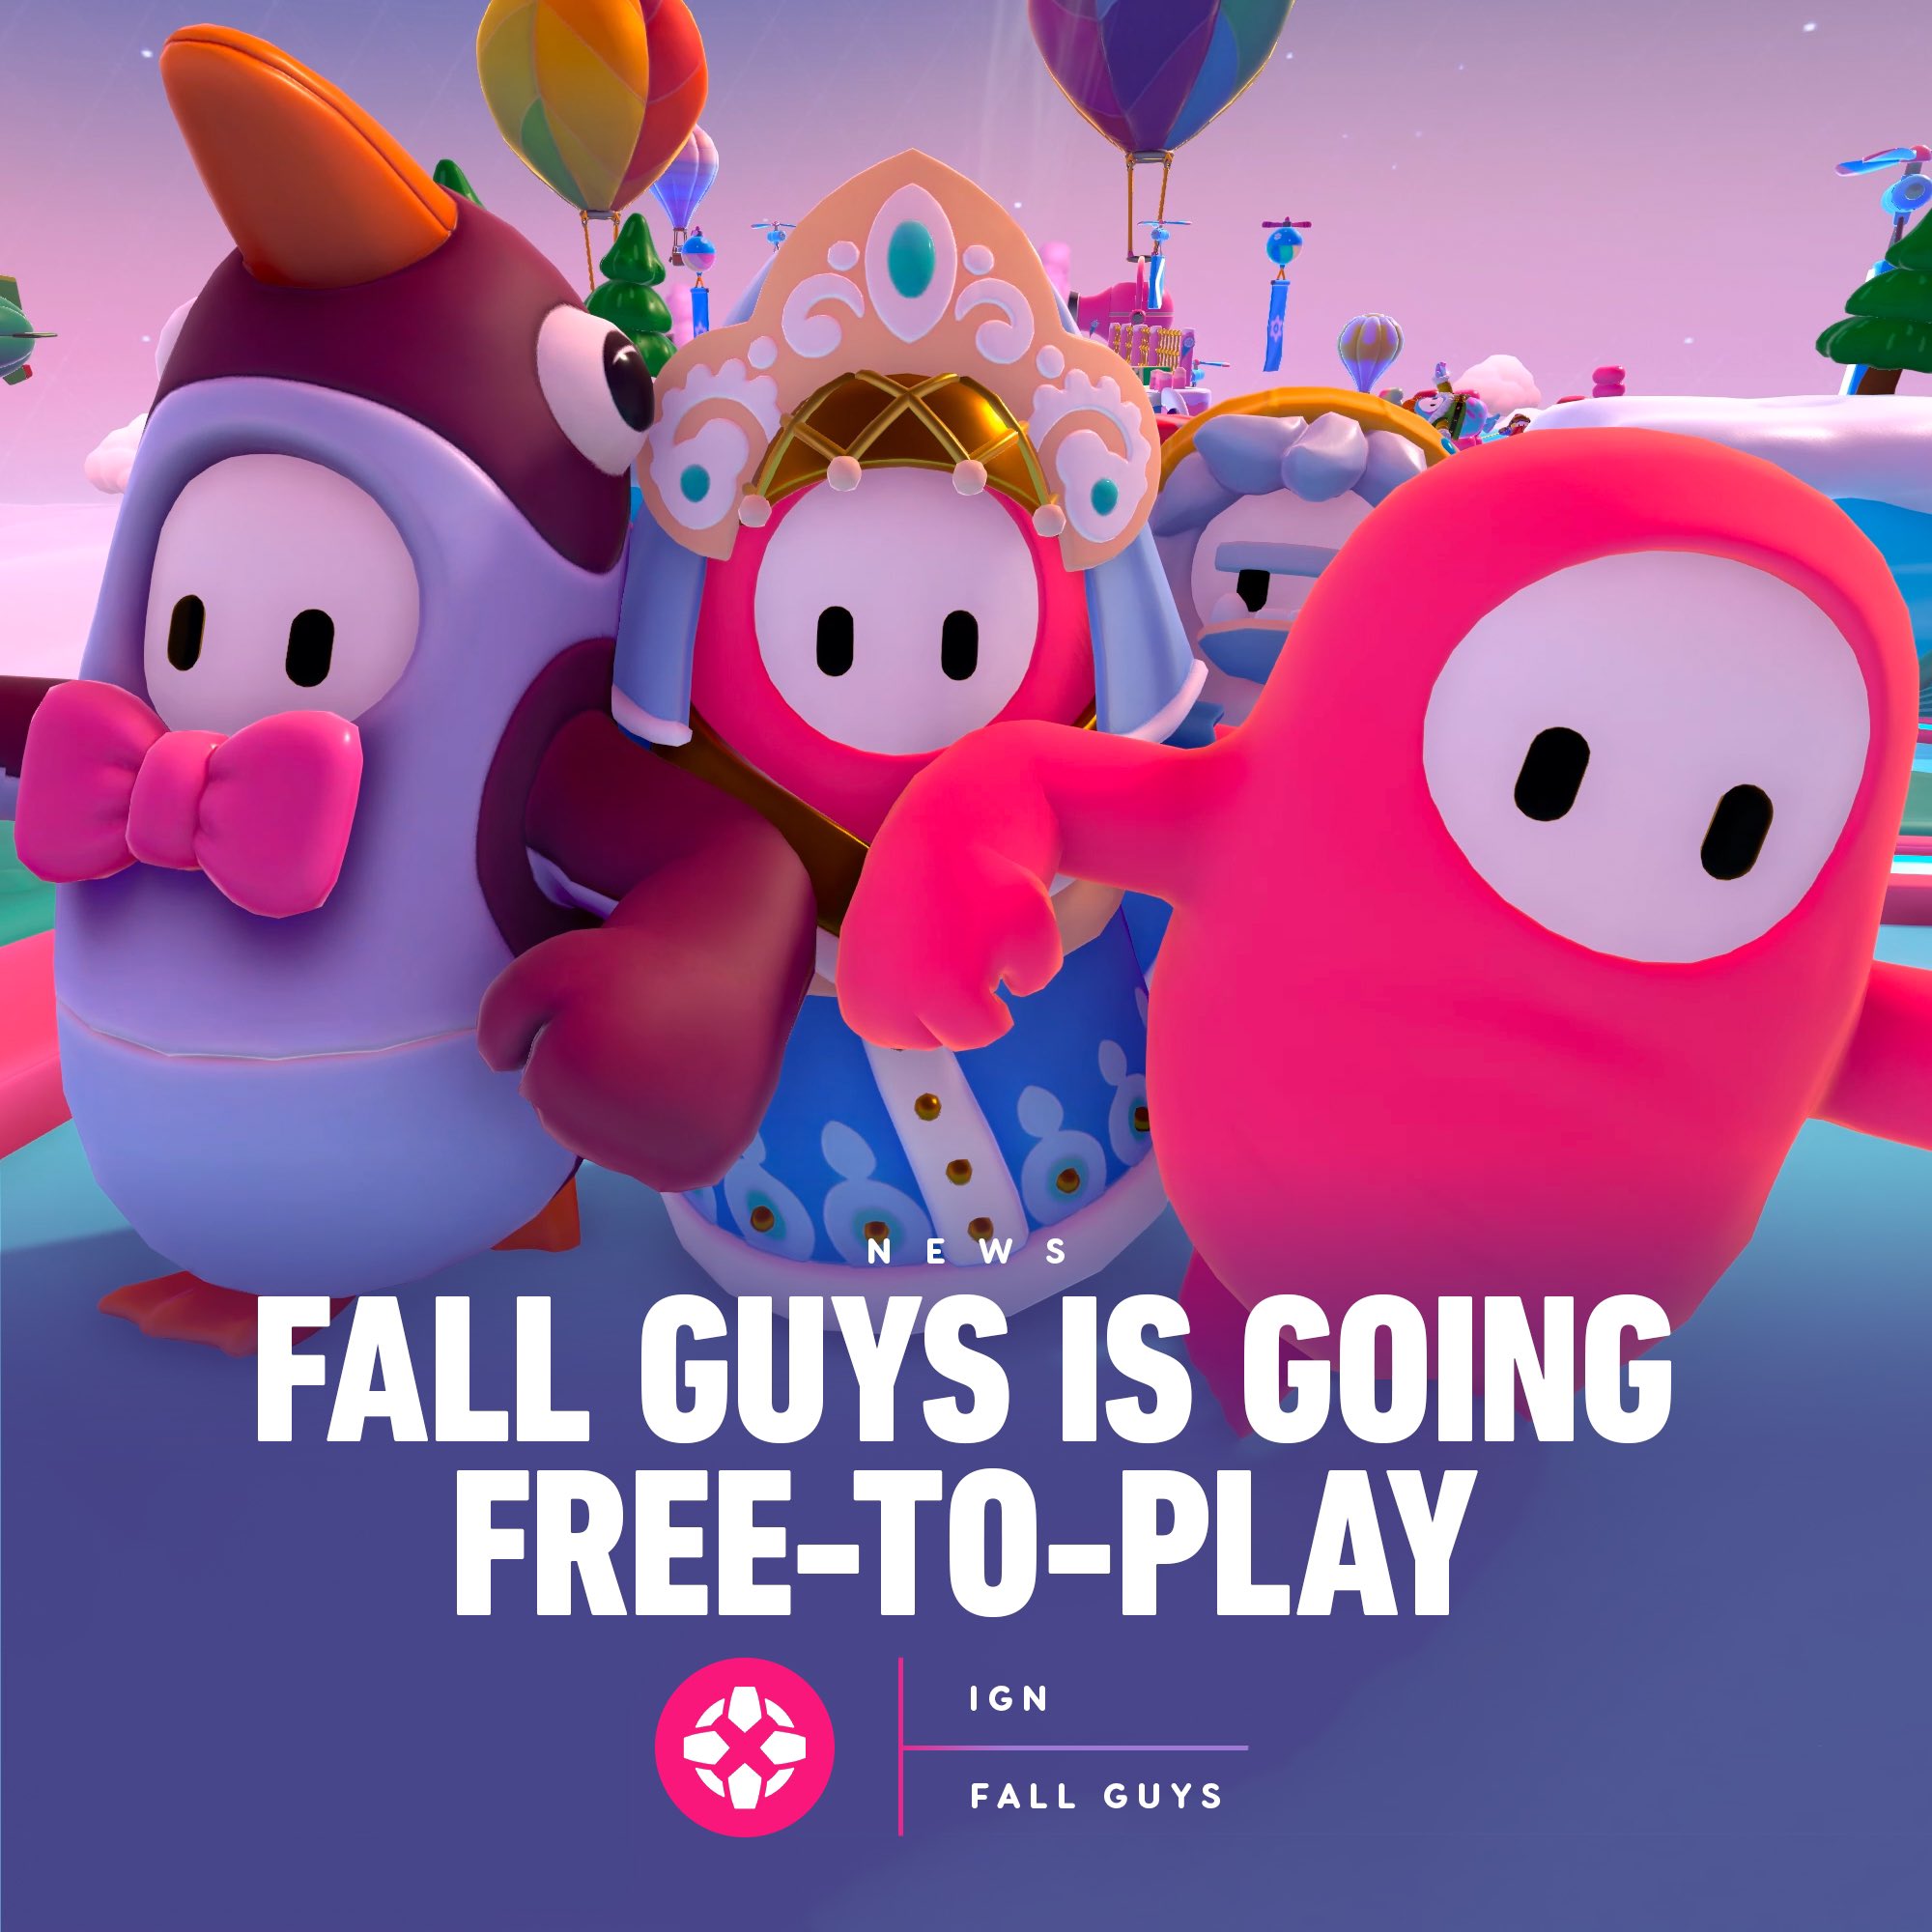 Fall Guys is going free-to-play on the Epic Games Store in June